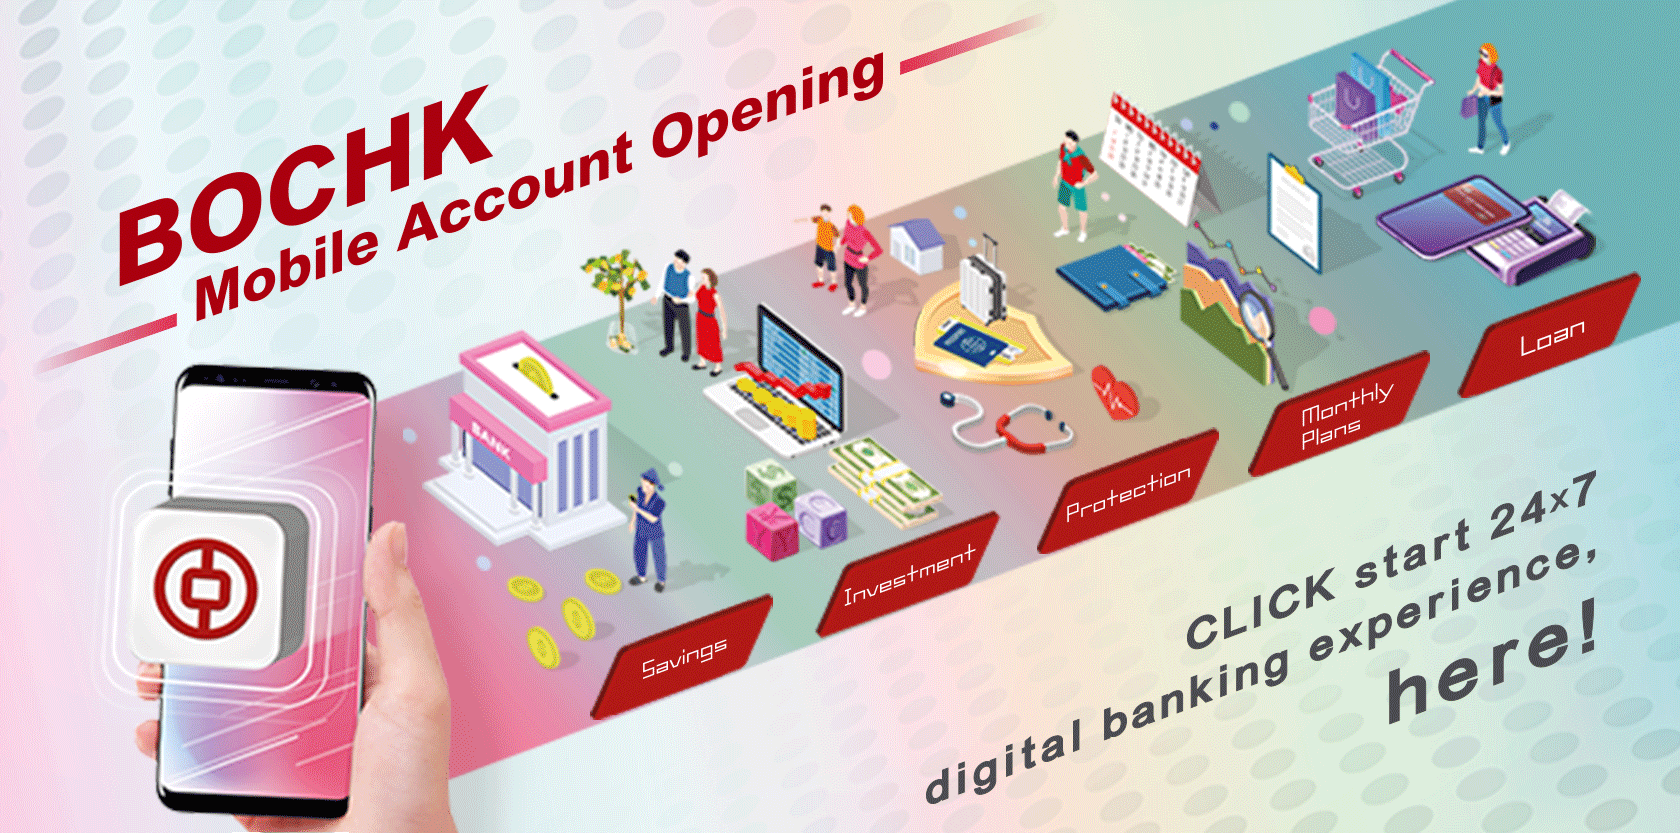 BOCHK Mobile Account Opening